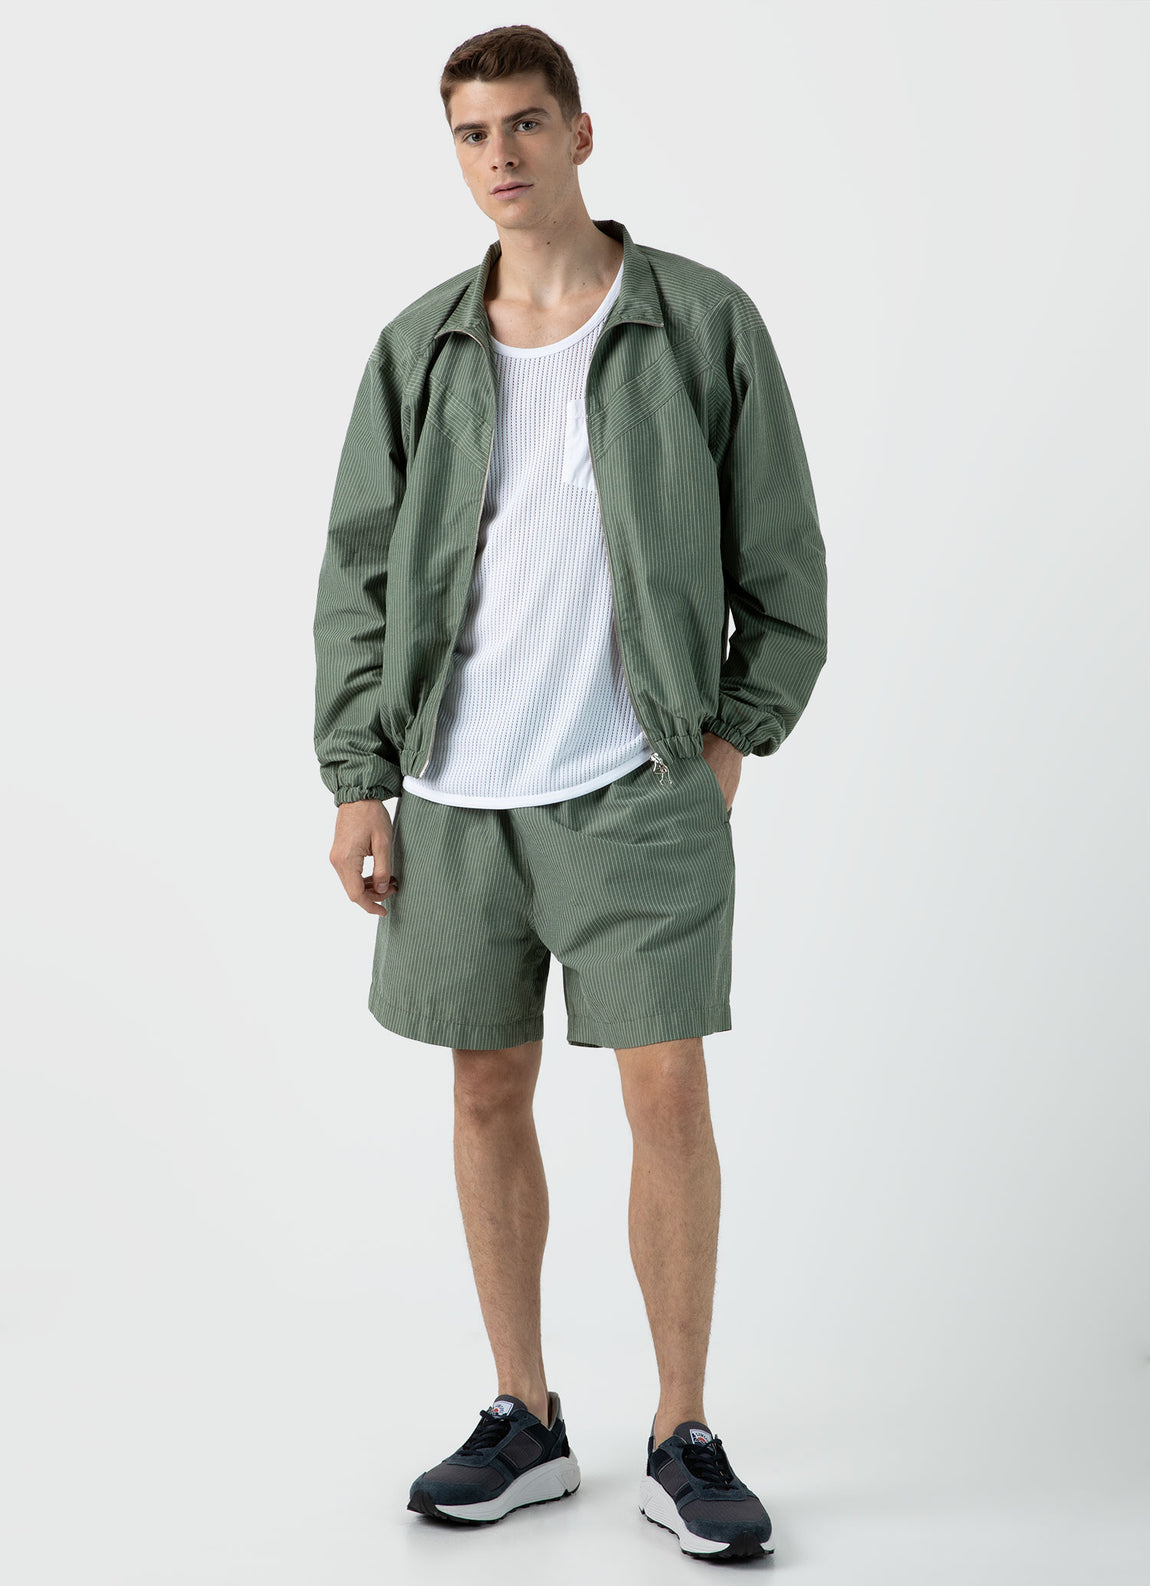 Men's Sunspel x Nigel Cabourn Ripstop Army Short in Army Green